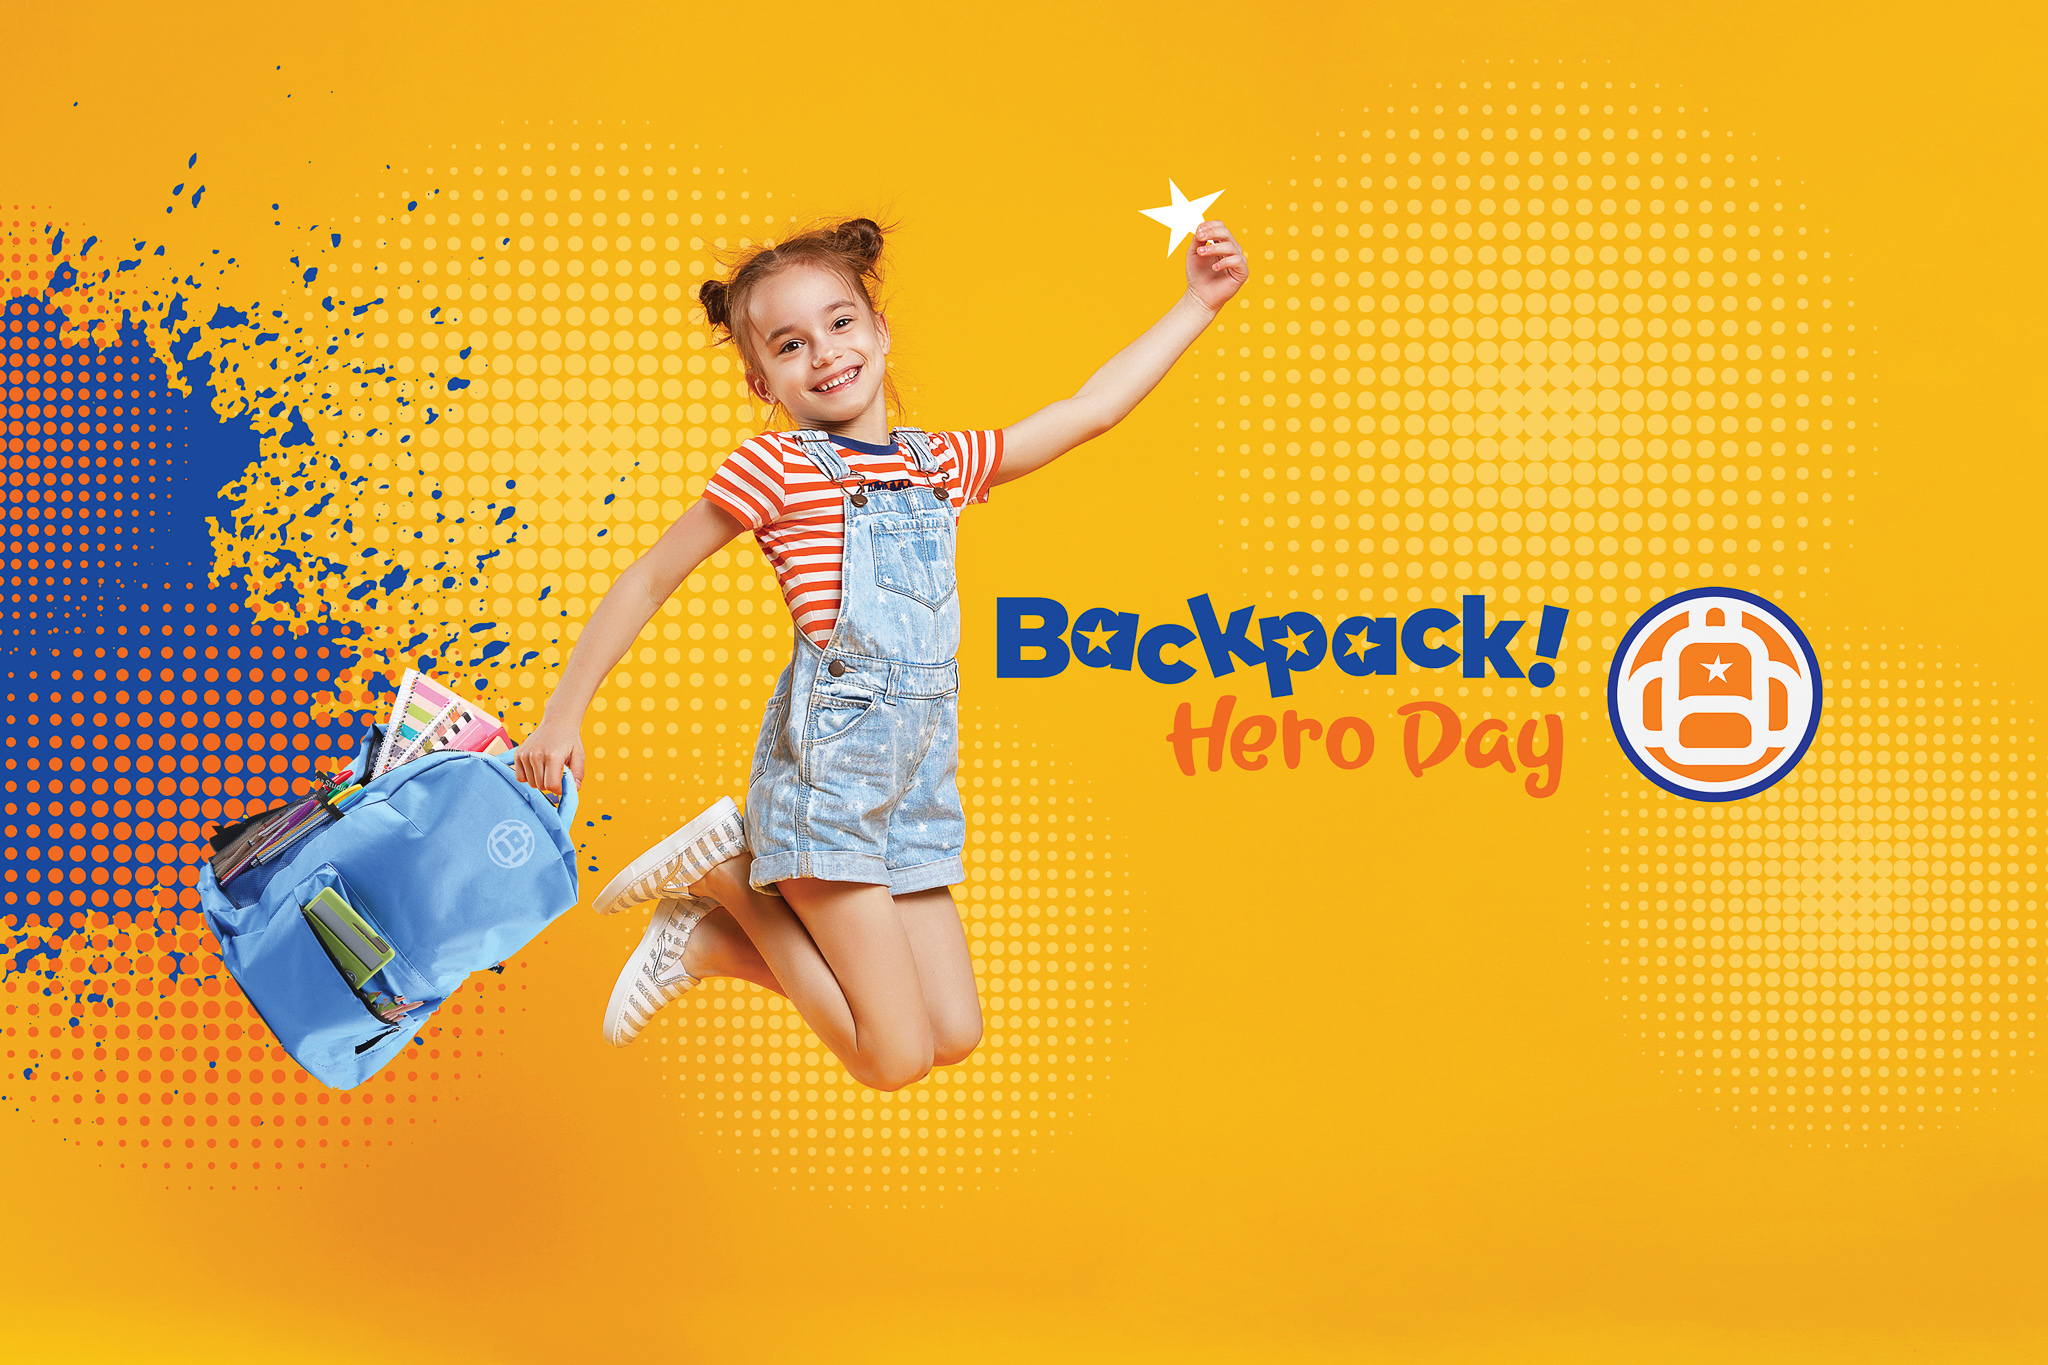 Smiling girl child jumping in air with a backpack in her right hand. The Backpack hero day logo is present to the right. The girl is very happy to receive a backpack.